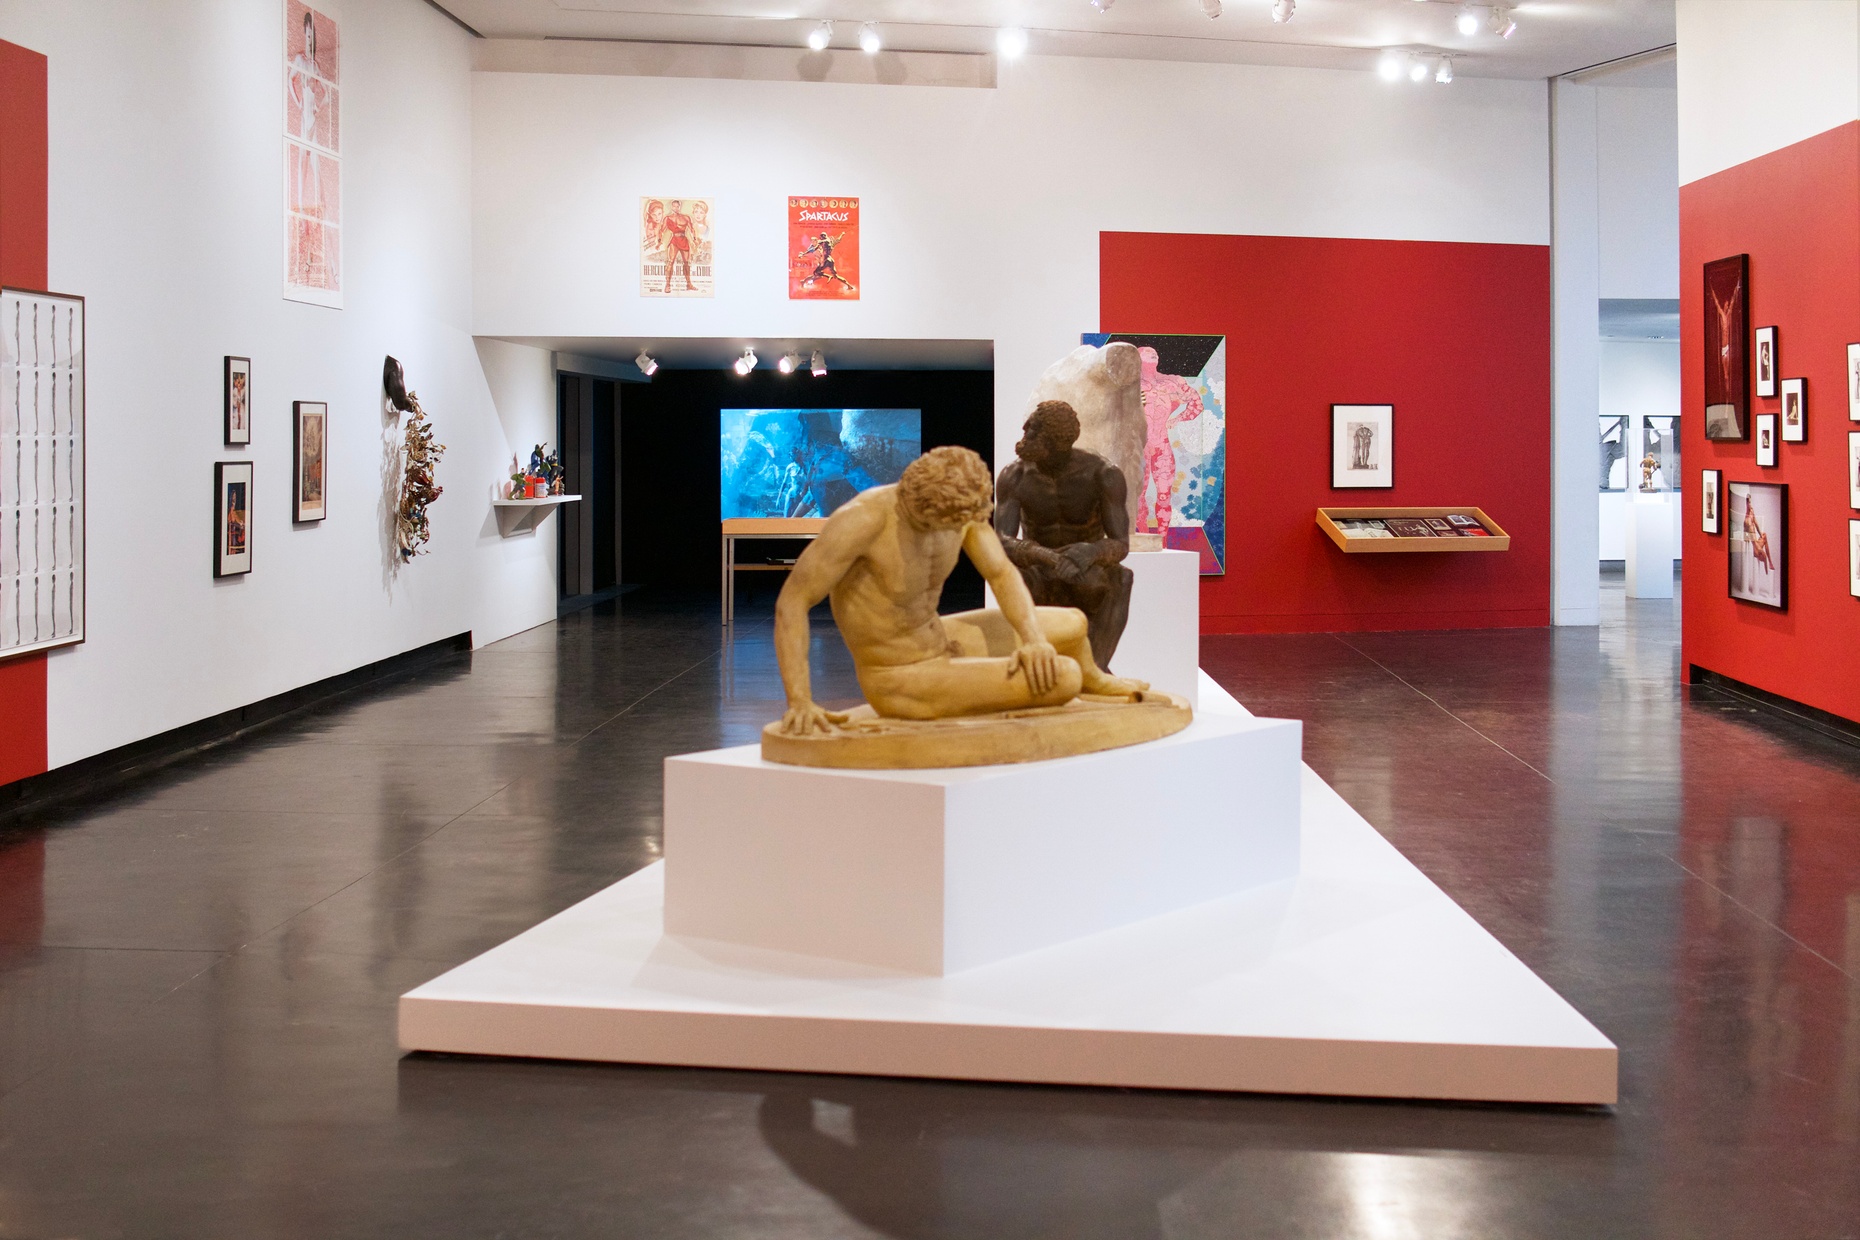 A gallery space with red and white painted walls and artworks featuring muscular people hung up. In the center of the gallery there are three classical sculptures featuring muscular, nude men and a torso.